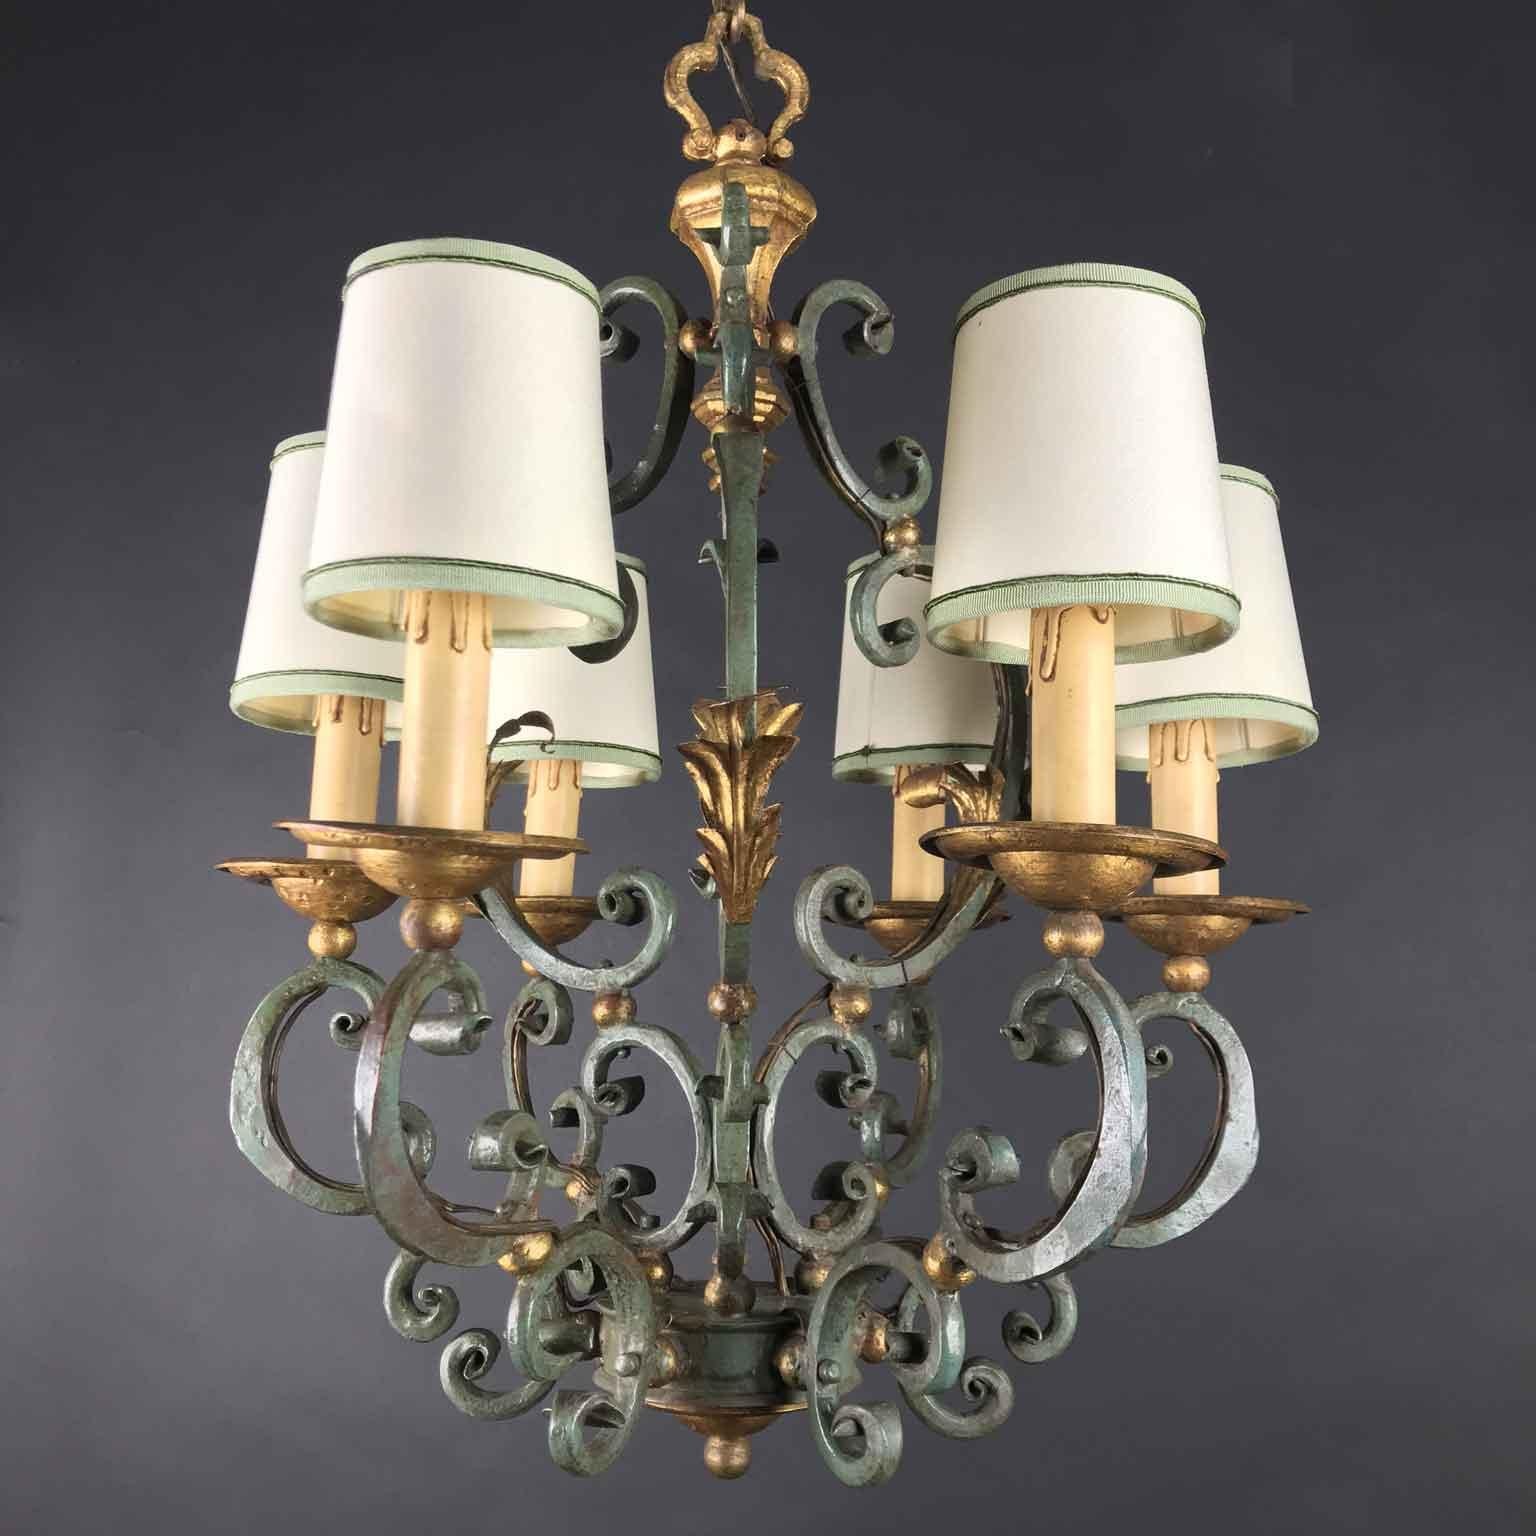 20th Century Italian Gray Painted Gilt-Leaf Wrought Iron Chandelier 7